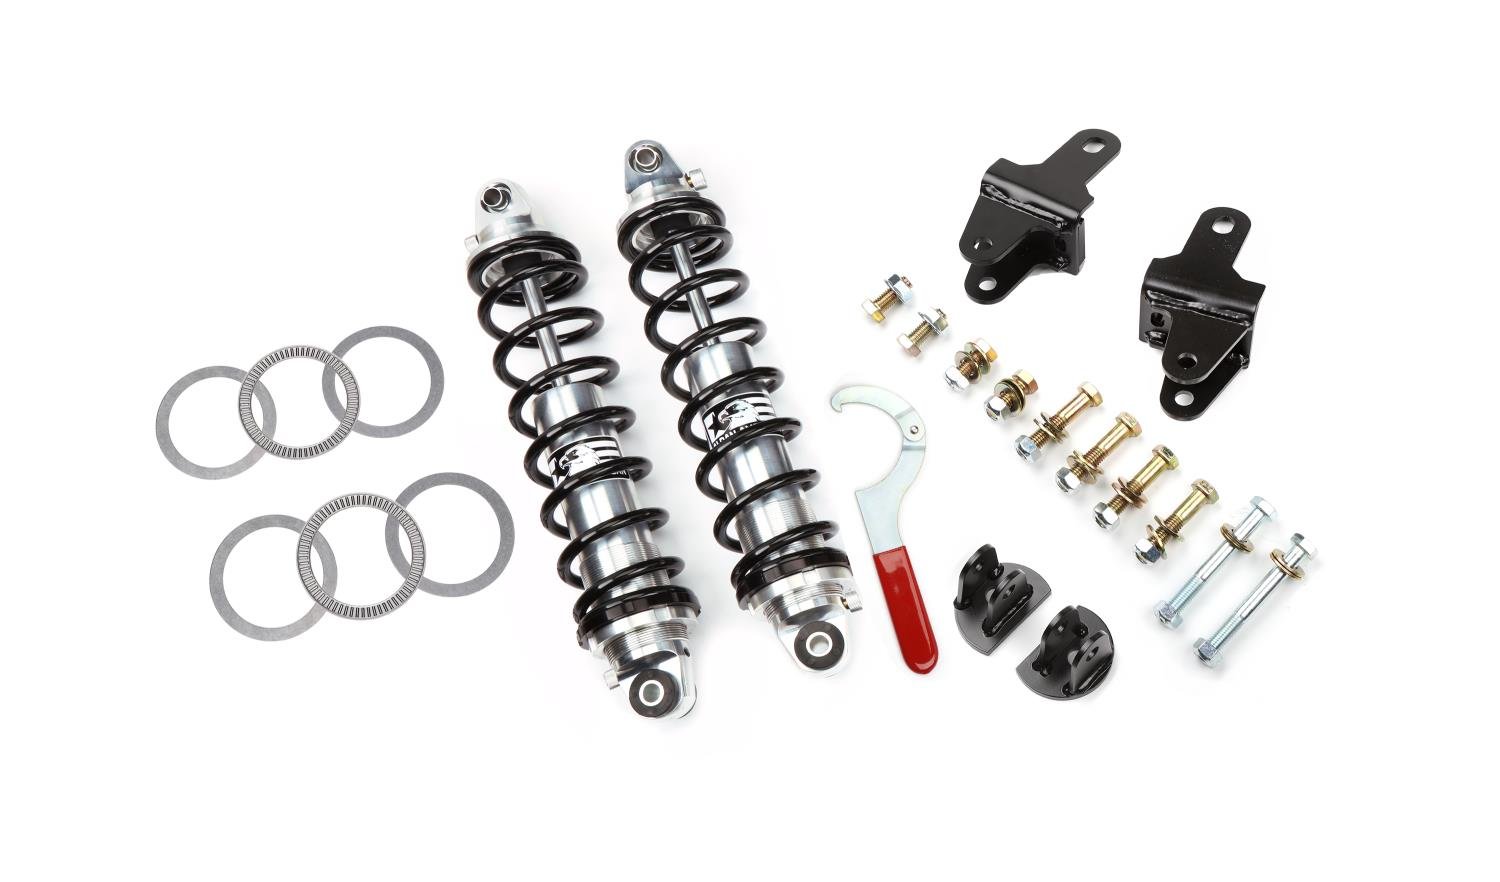 Rear Coil-Over Kit 1979-2004 Ford Mustang, Double-Adjustable [180 lbs./in. Springs]